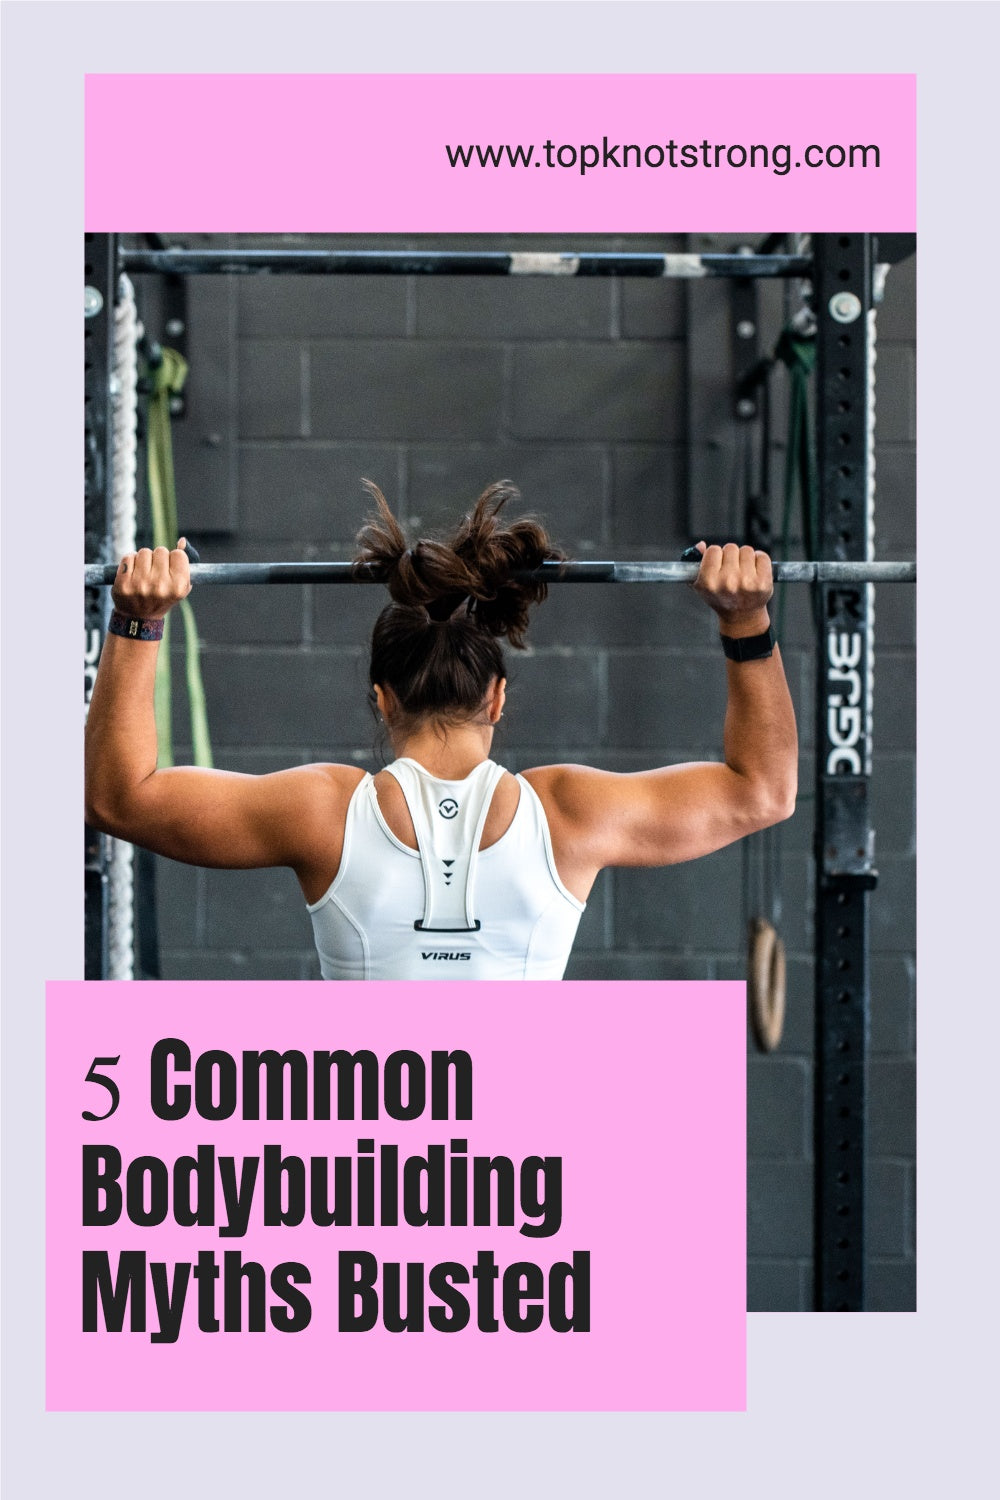 5 Common Bodybuilding Myths Busted